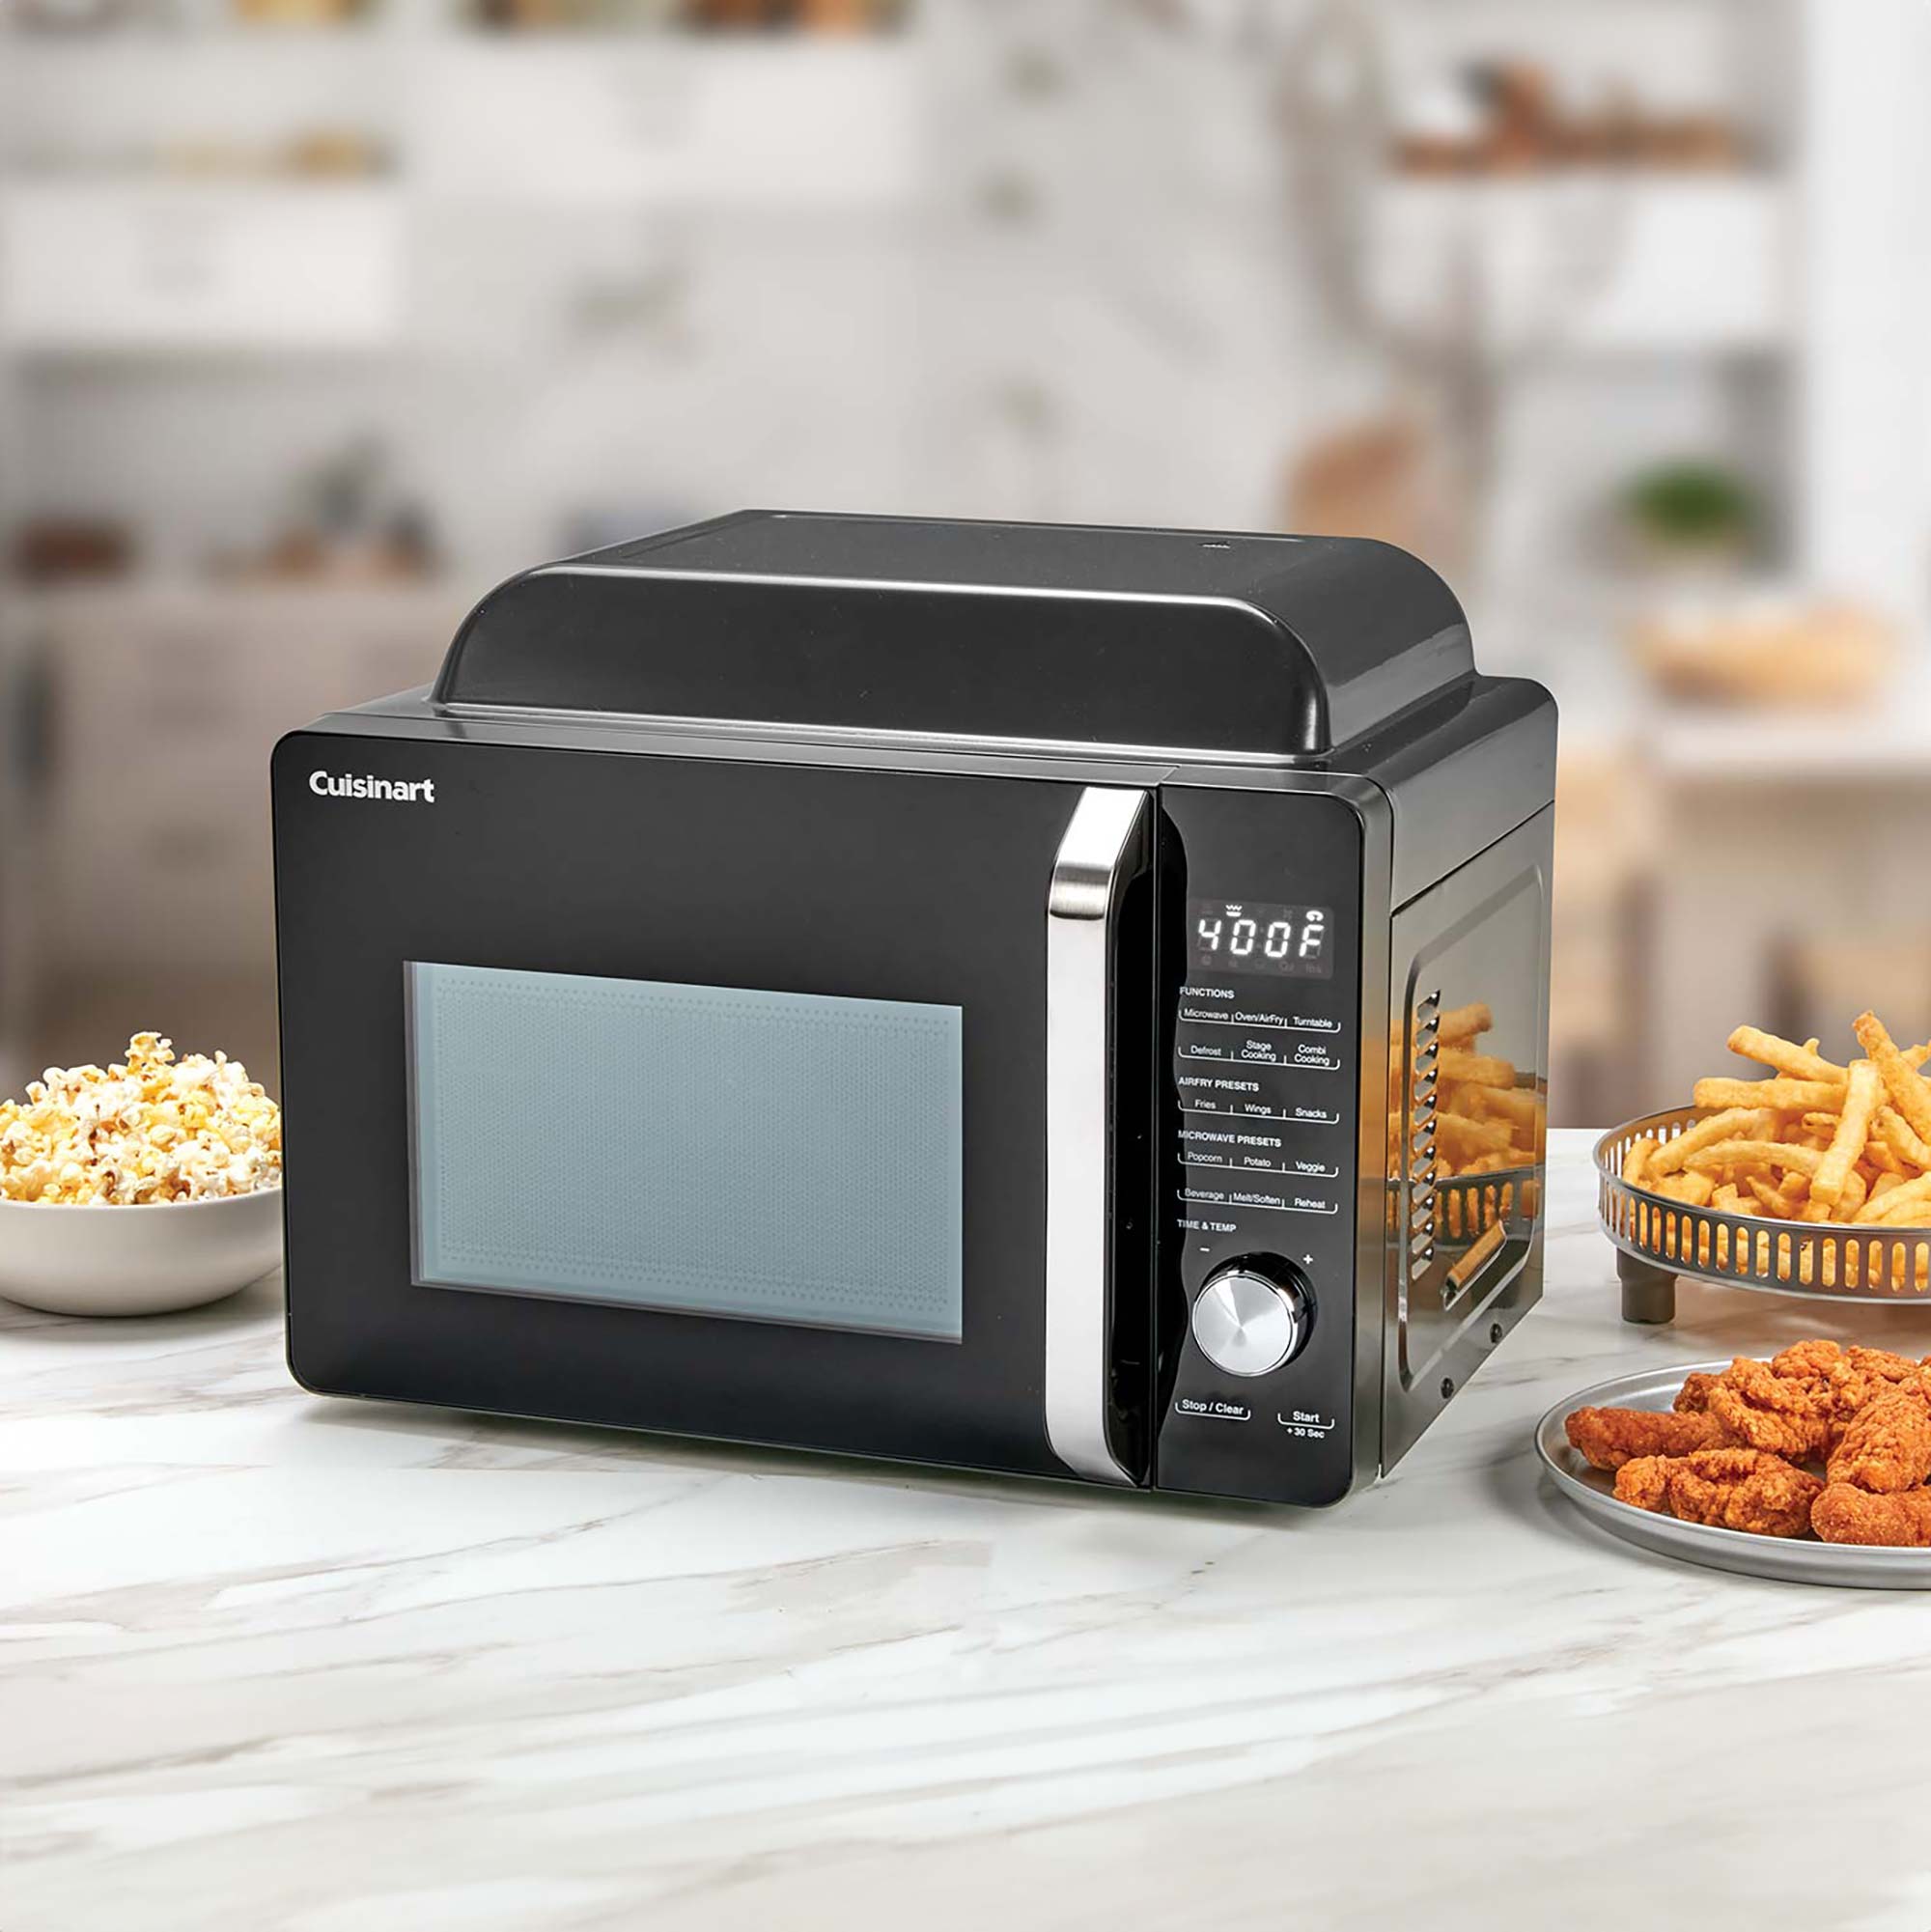  Cuisinart 3-in-1 Microwave AirFryer Oven, Black: Home & Kitchen